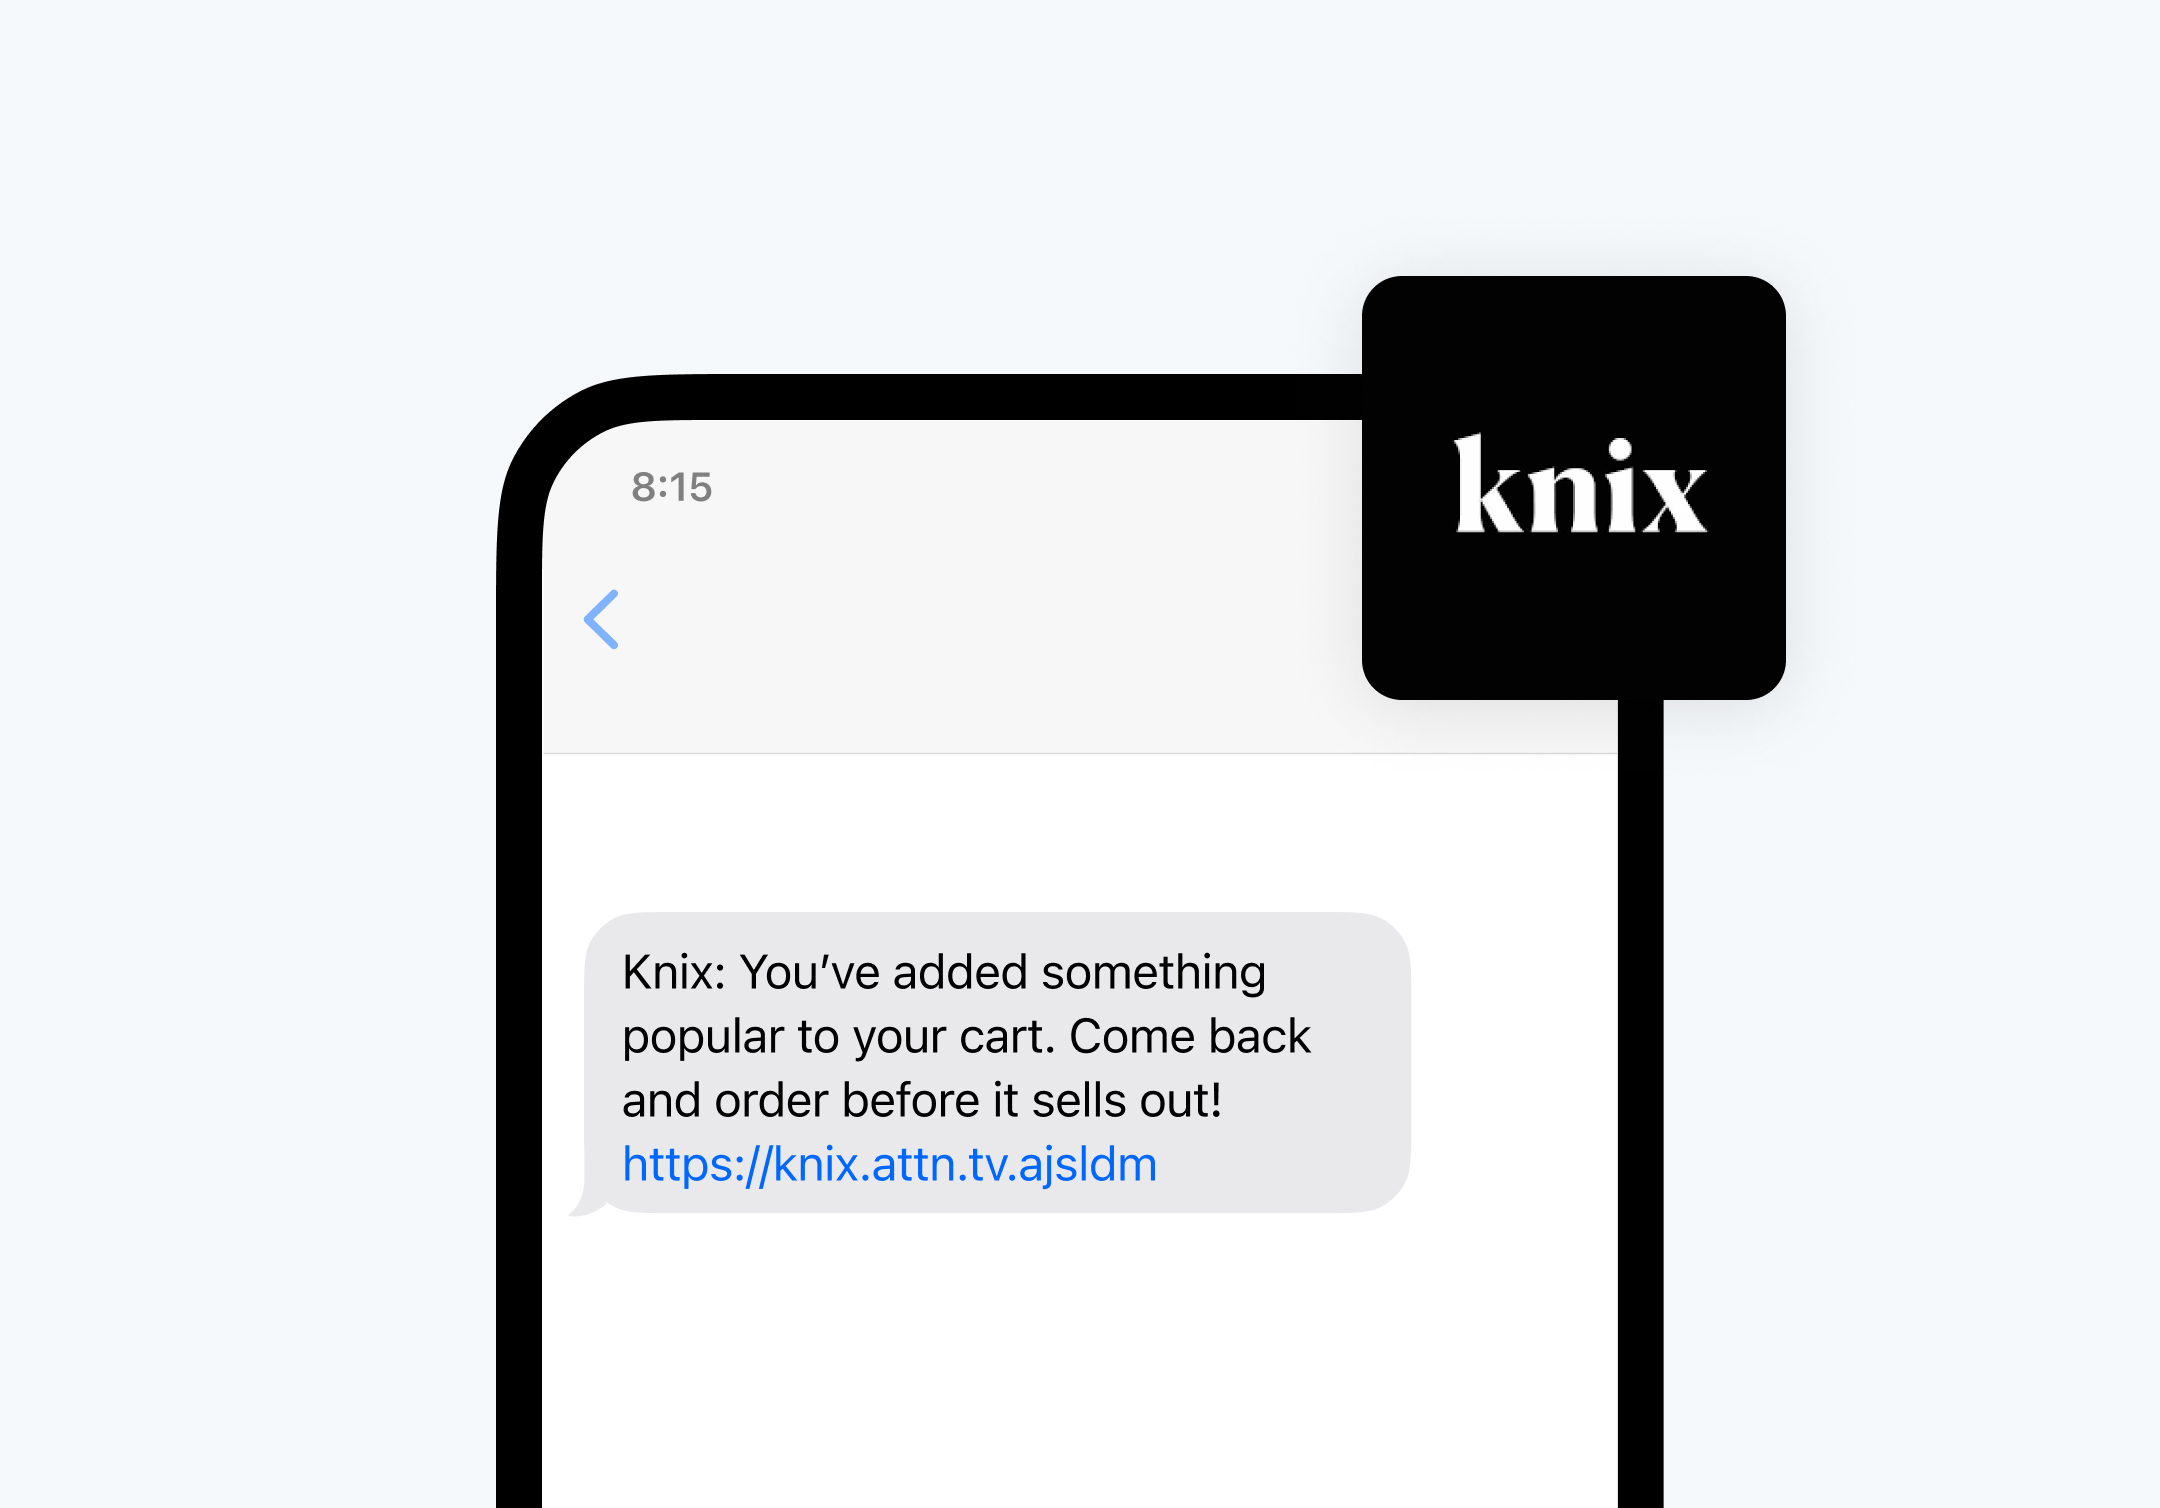 A notification of an abandoned cart on a smartphone text message from Knix, urging the recipient to complete their purchase of a popular item before it sells out, highlighting the use of text subscription services for e-commerce engagement.